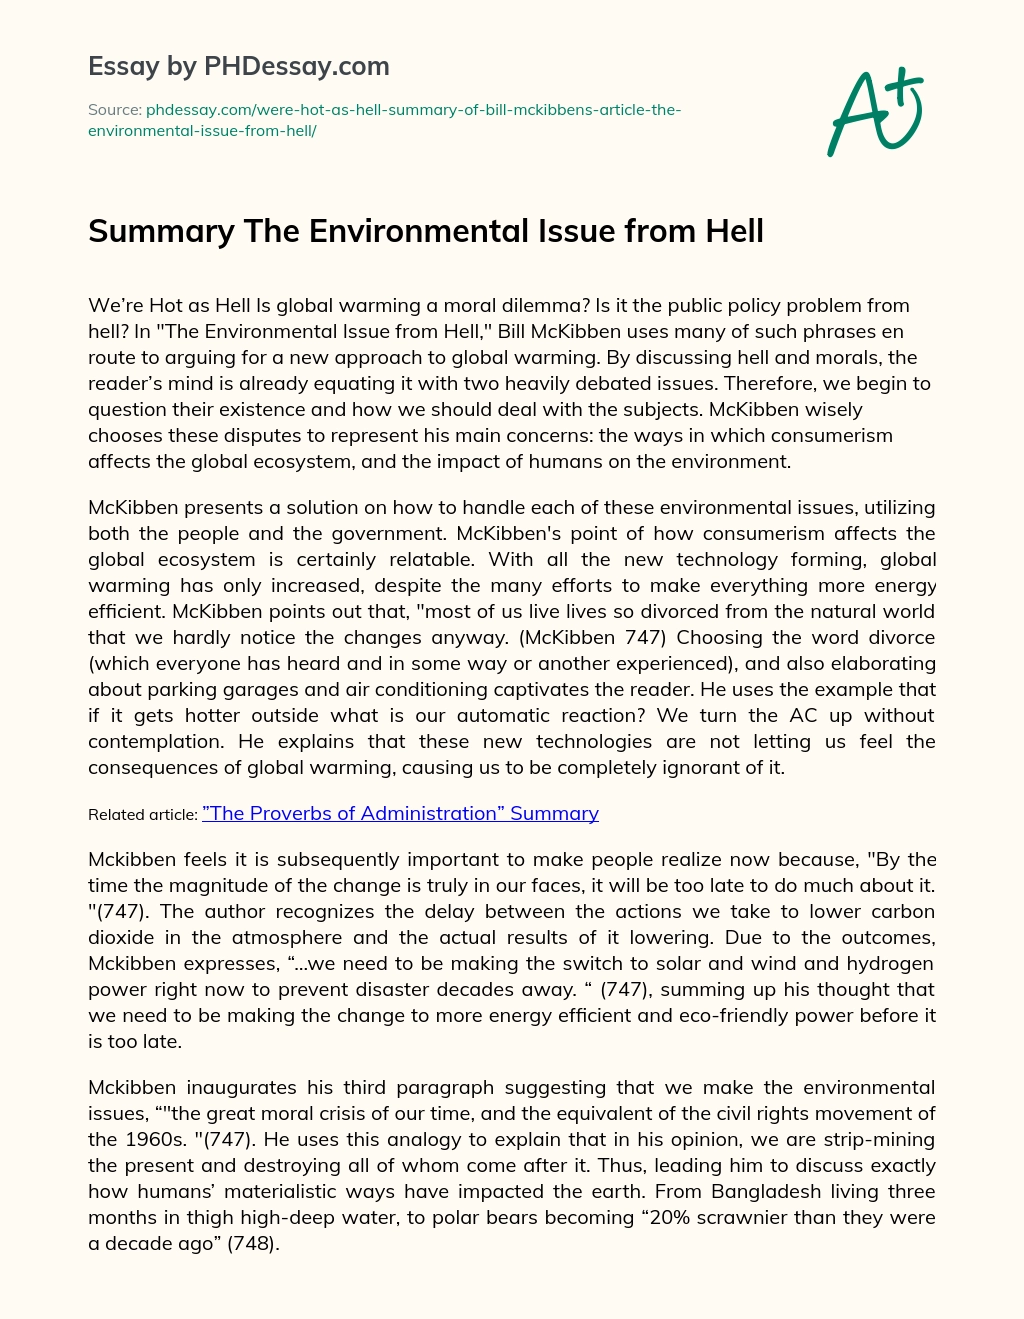 Summary The Environmental Issue from Hell essay